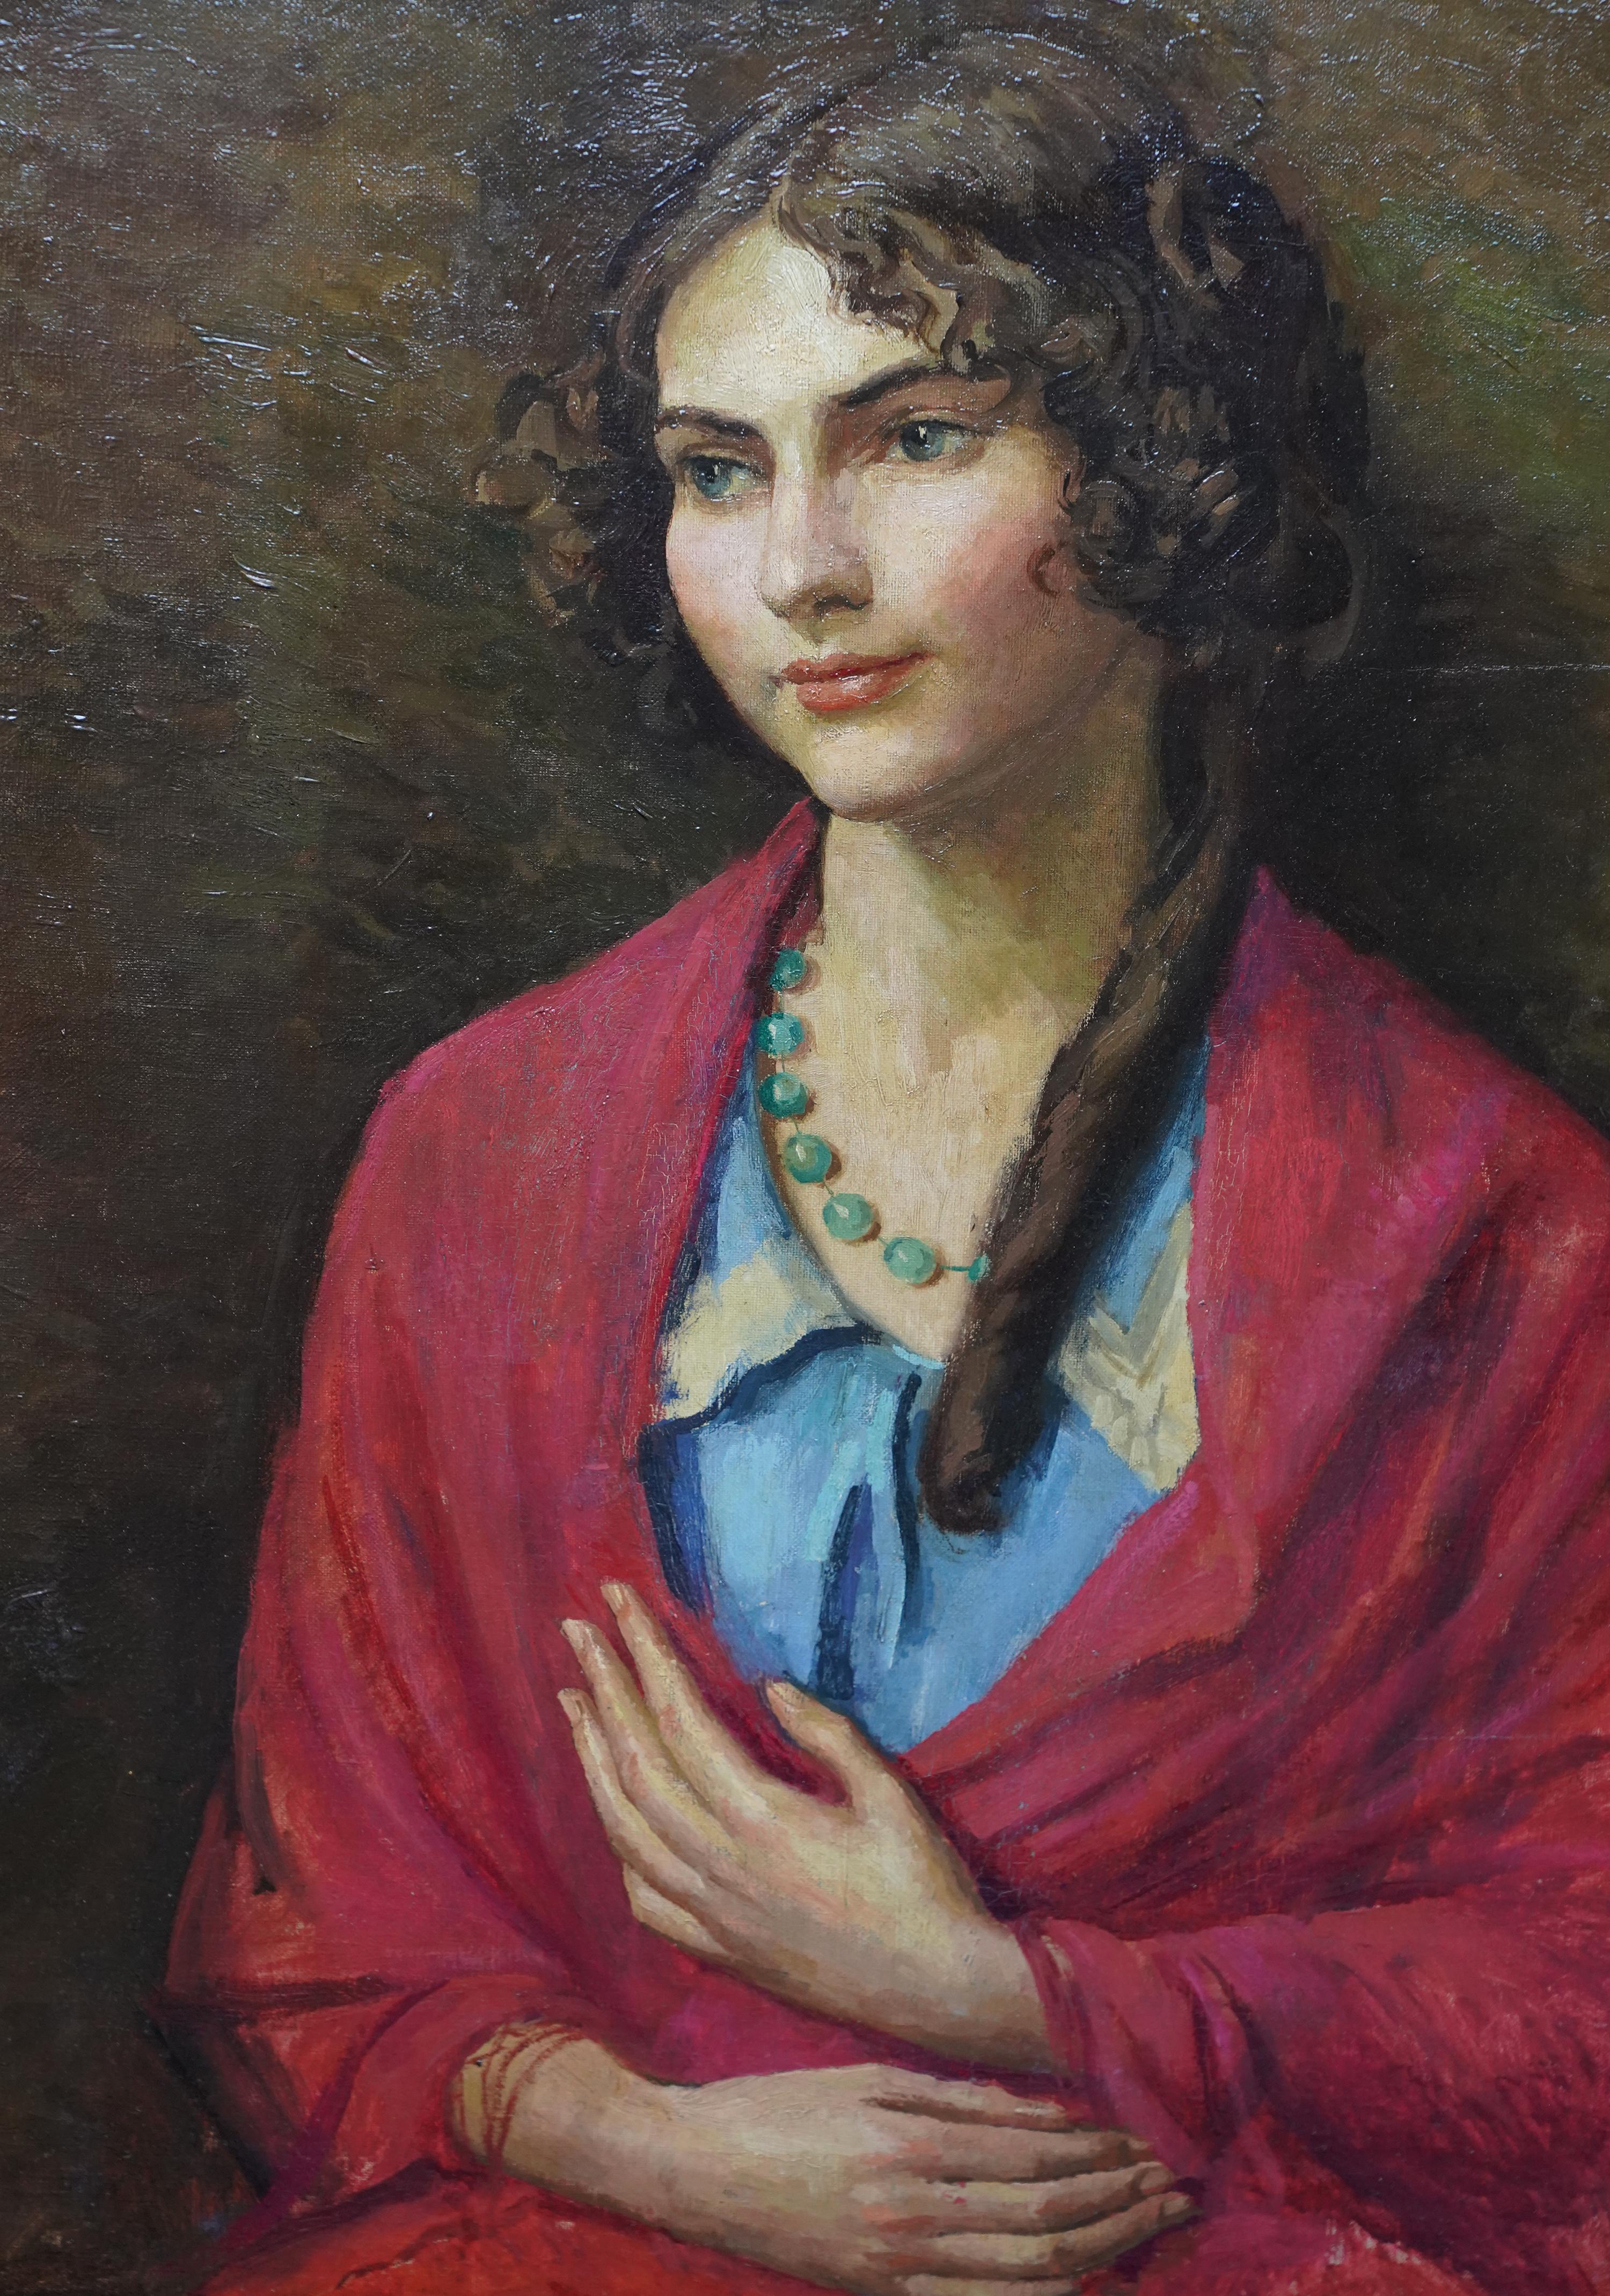 This lovely British portrait oil painting is by noted artist Lionel Ellis. Painted circa 1940, the picture is a half-length seated portrait of a smiling woman wrapped in a red shawl, her dark hair cascading down one shoulder in a long ringlet. There